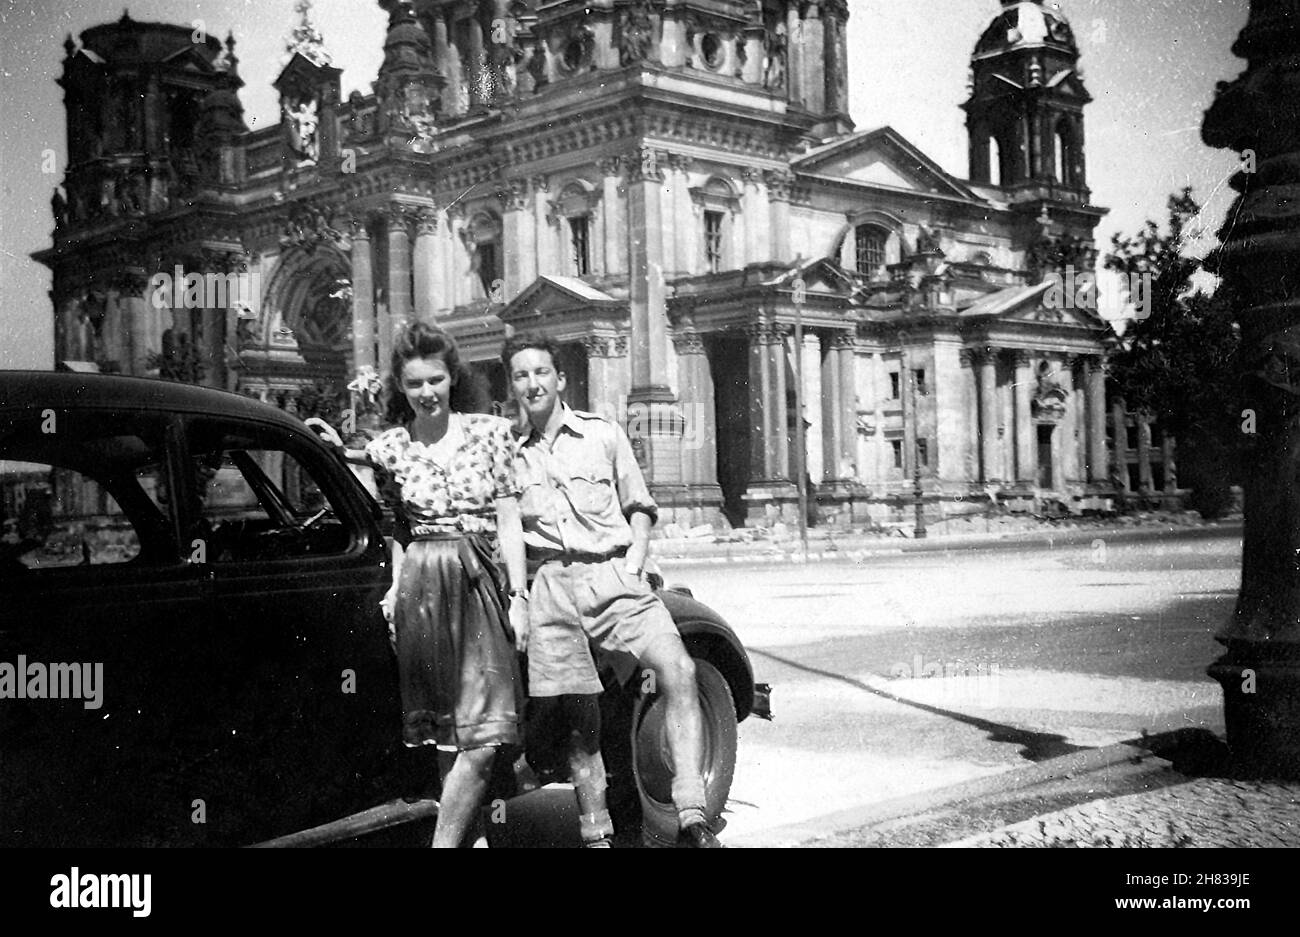 In August 1947 RAF pilot-officer Browne visited Berlin and took a female companion on a sightseeing tour of the city. Here they are posed in front of the ruins of the Free Cathedral. The girl is unknown, possibly a waitress going by her apron. P/O Browne flew into Berlin Gatow on 12th August 1947 and flew out to RAF Bückeberg on 19th August 1947. Stock Photo